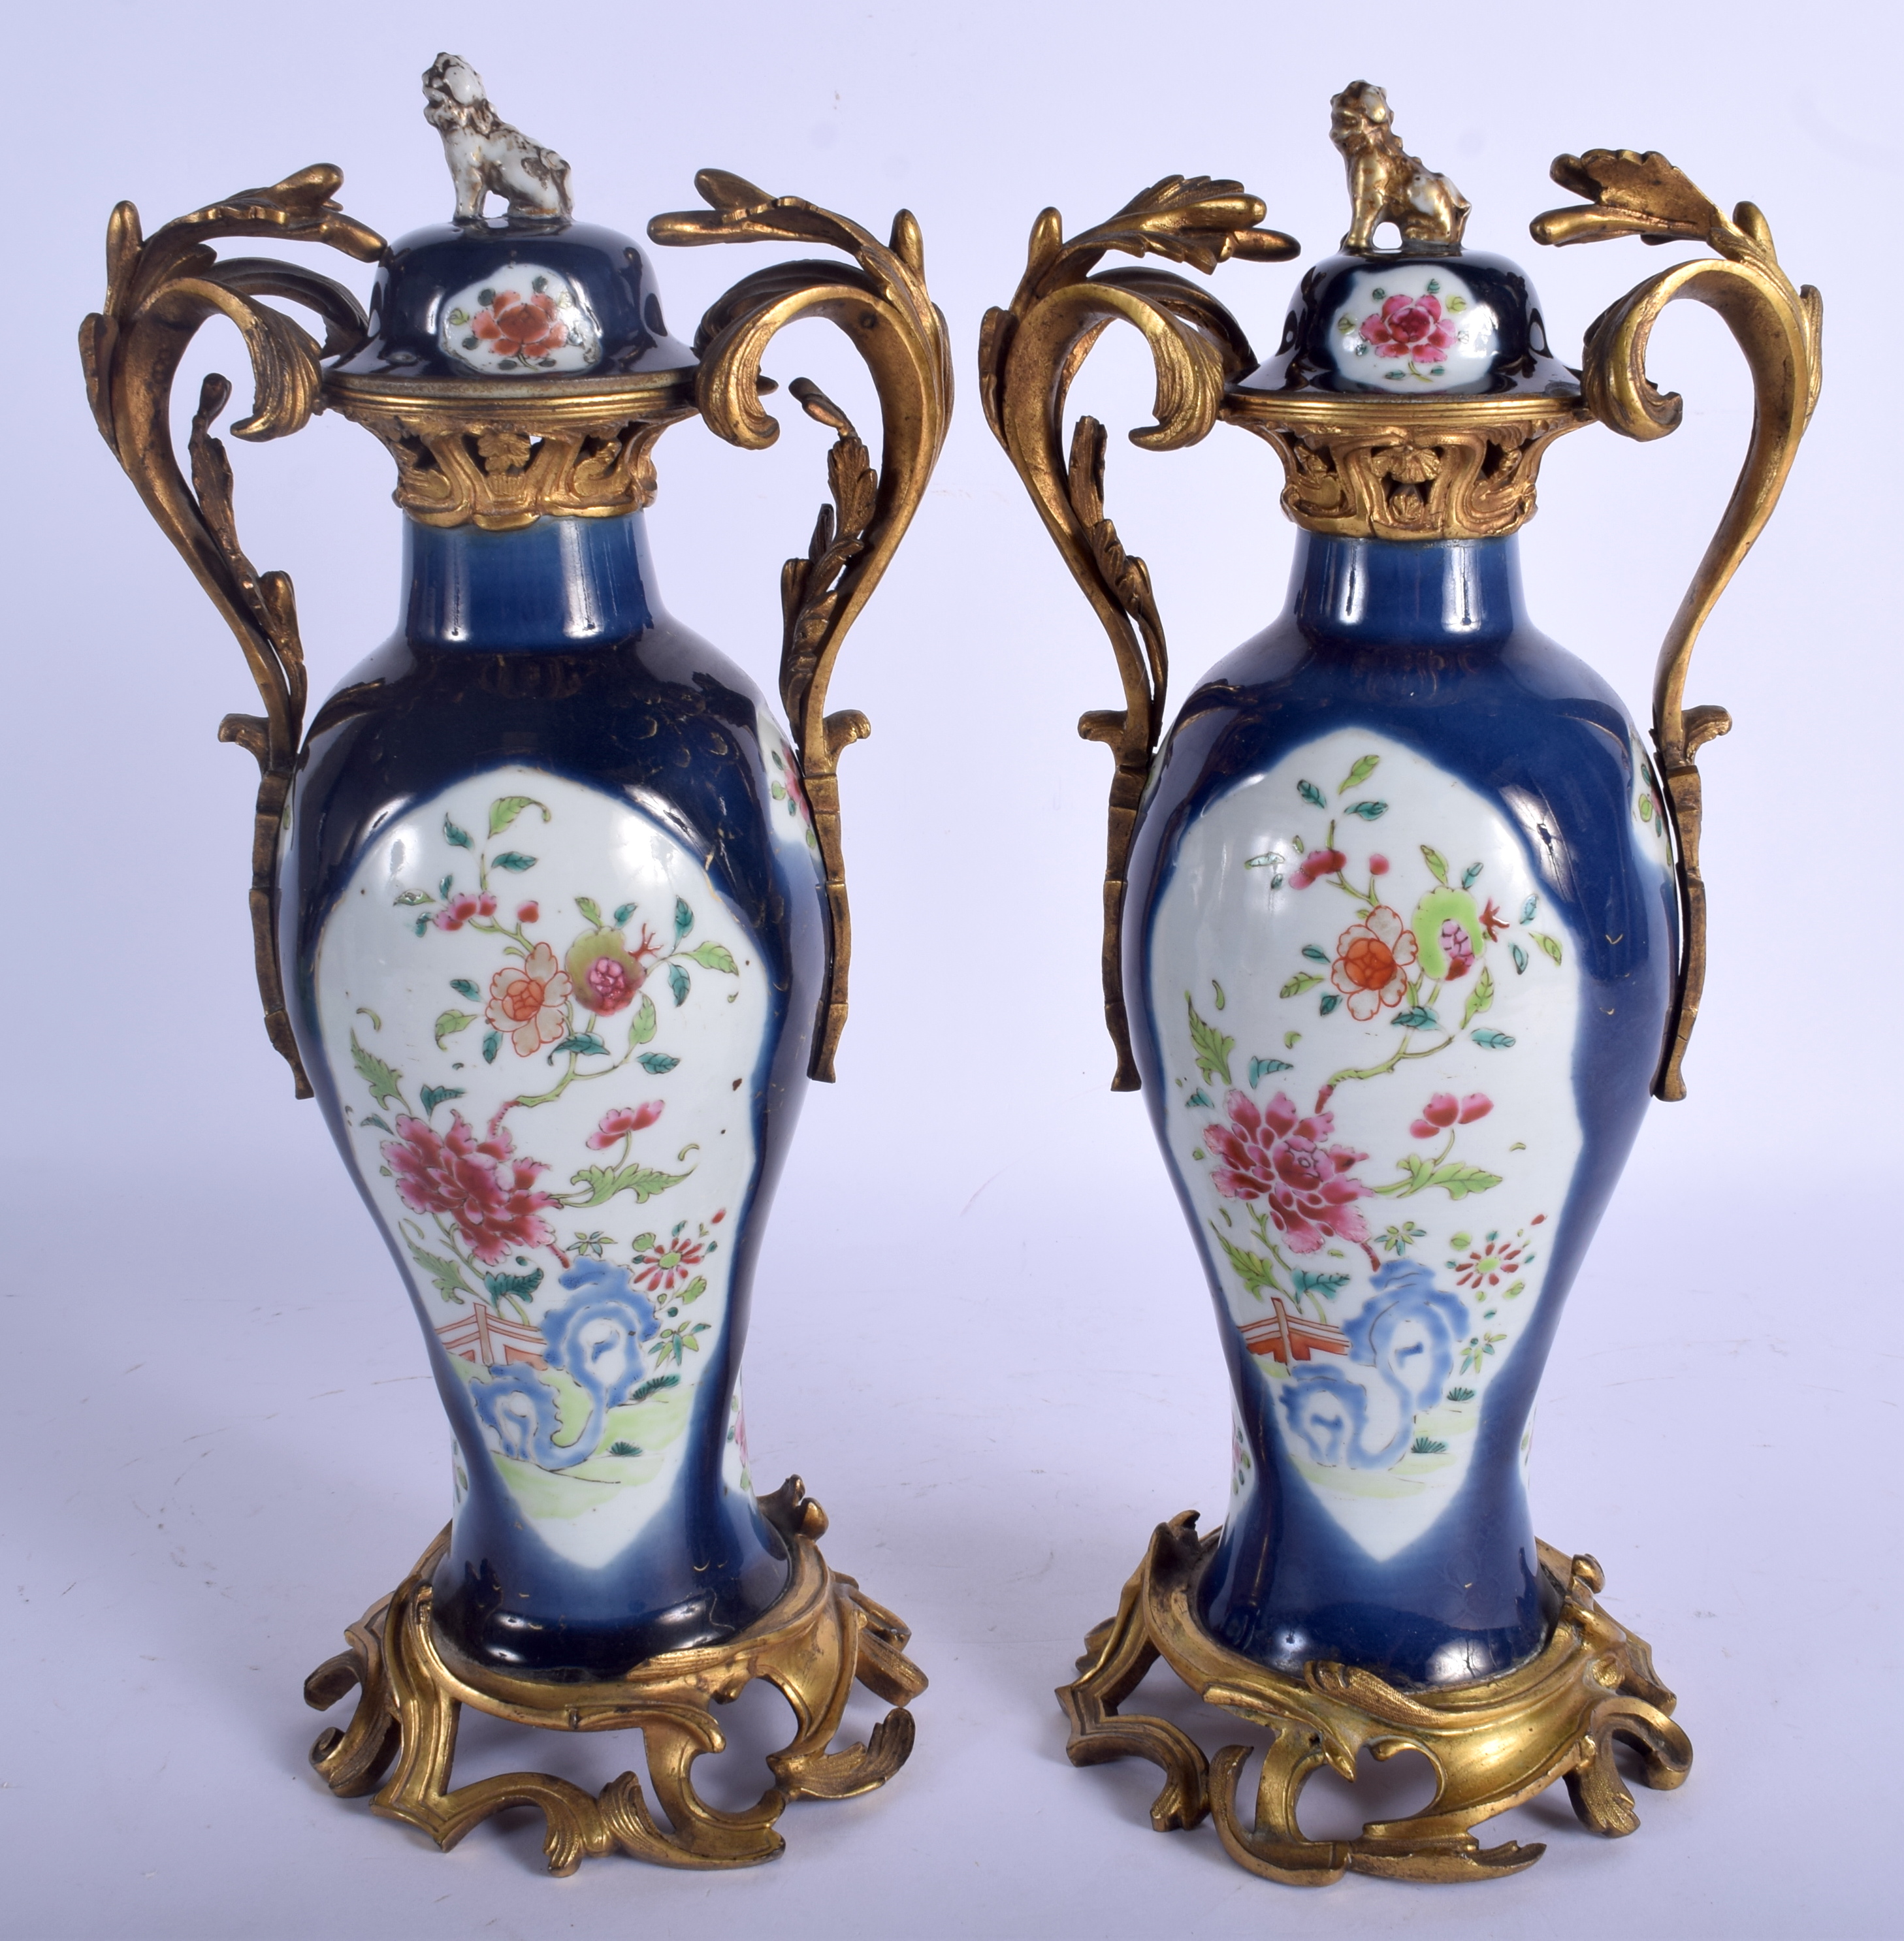 A LARGE PAIR OF 18TH CENTURY CHINESE EXPORT VASES Yongzheng/Qianlong, painted with fenced gardens, m - Image 2 of 4